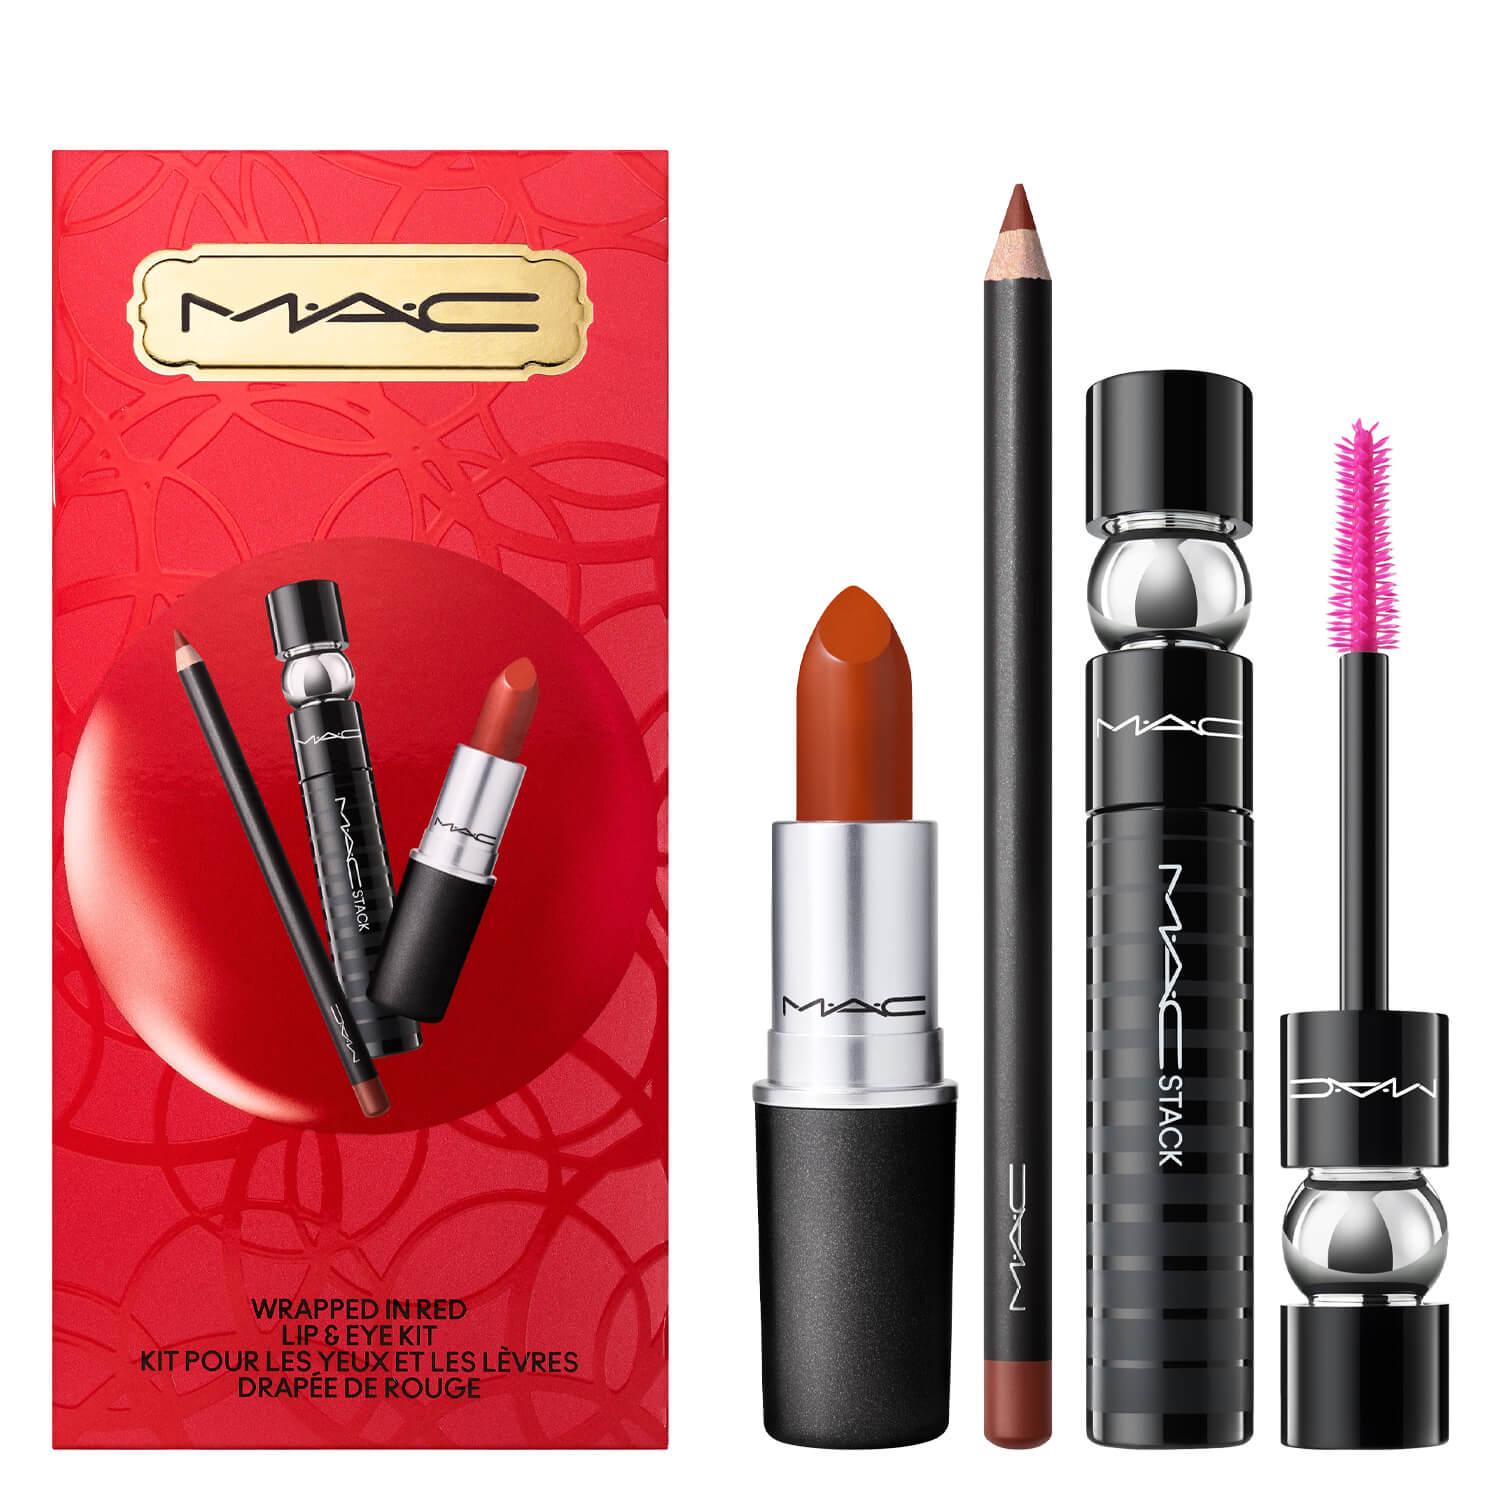 M·A·C Specials - Wrapped In Red Lip & Eye Kit